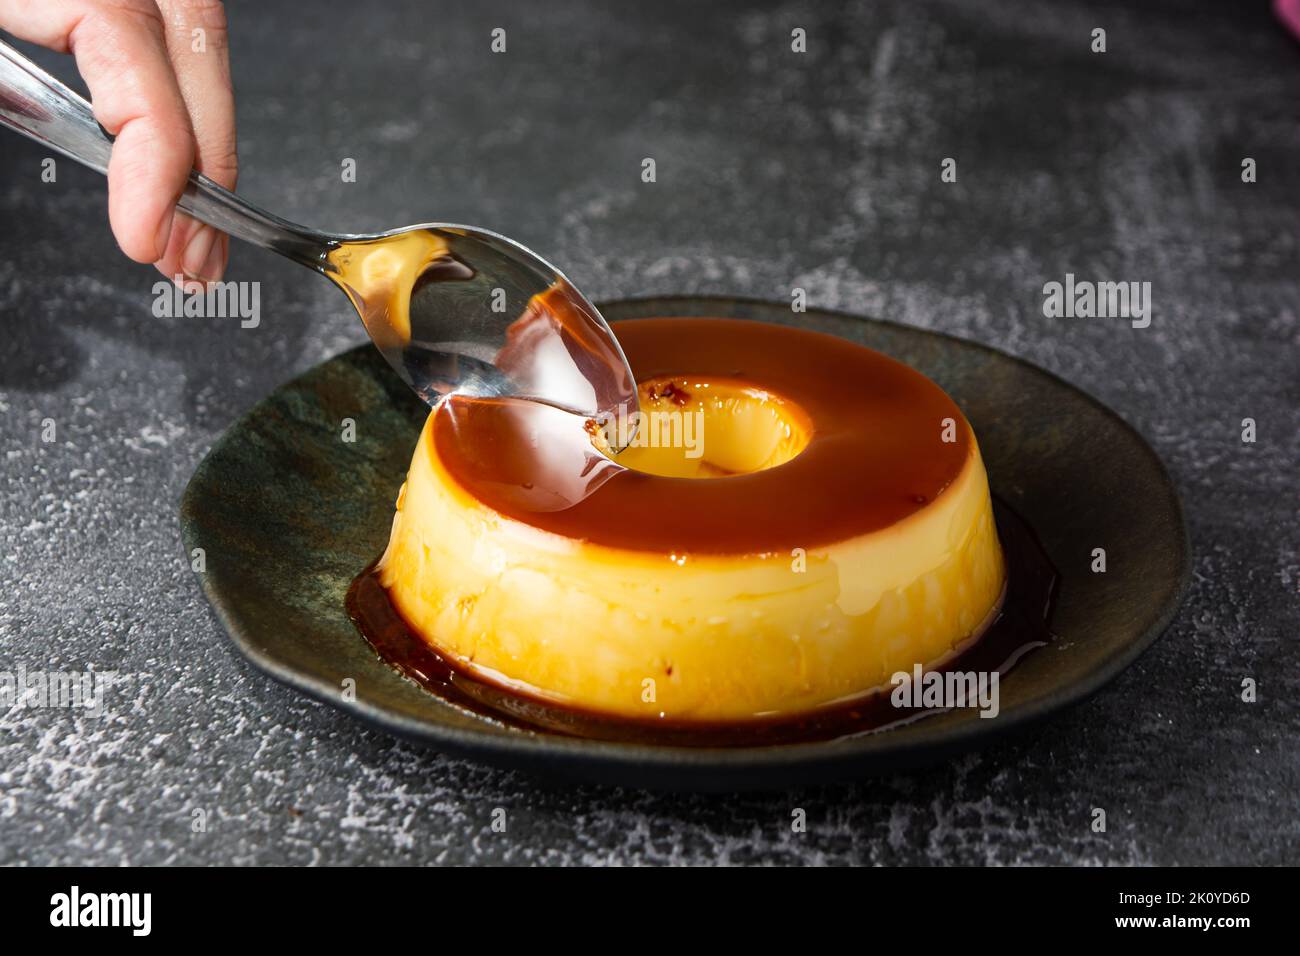 https://c8.alamy.com/comp/2K0YD6D/pudim-de-leite-or-milk-pudding-traditional-brazilian-dessert-with-caramel-also-known-as-flan-high-angle-view-2K0YD6D.jpg